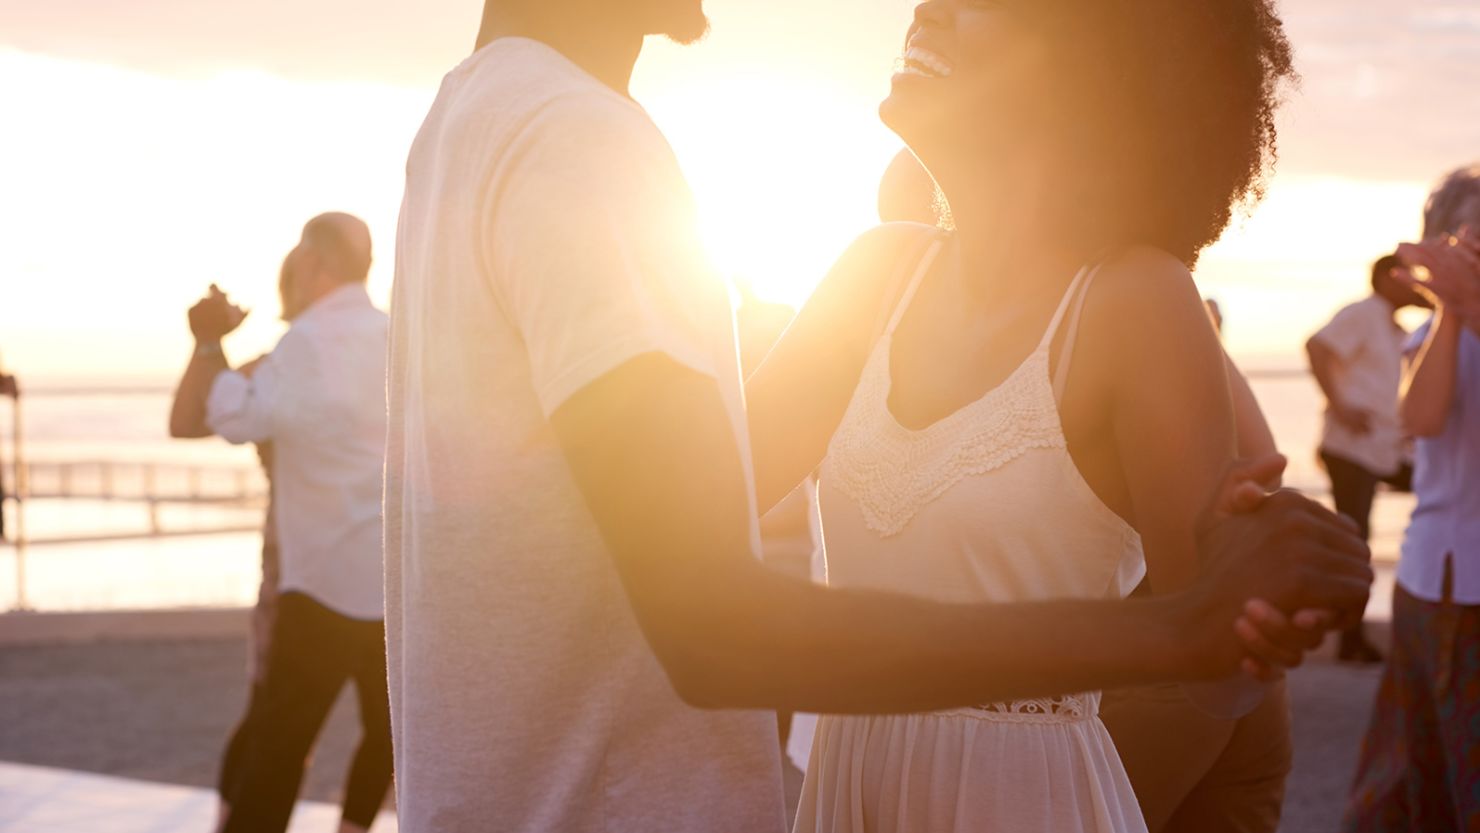 best date night for married couples dating engaged dancing outside evening sunset